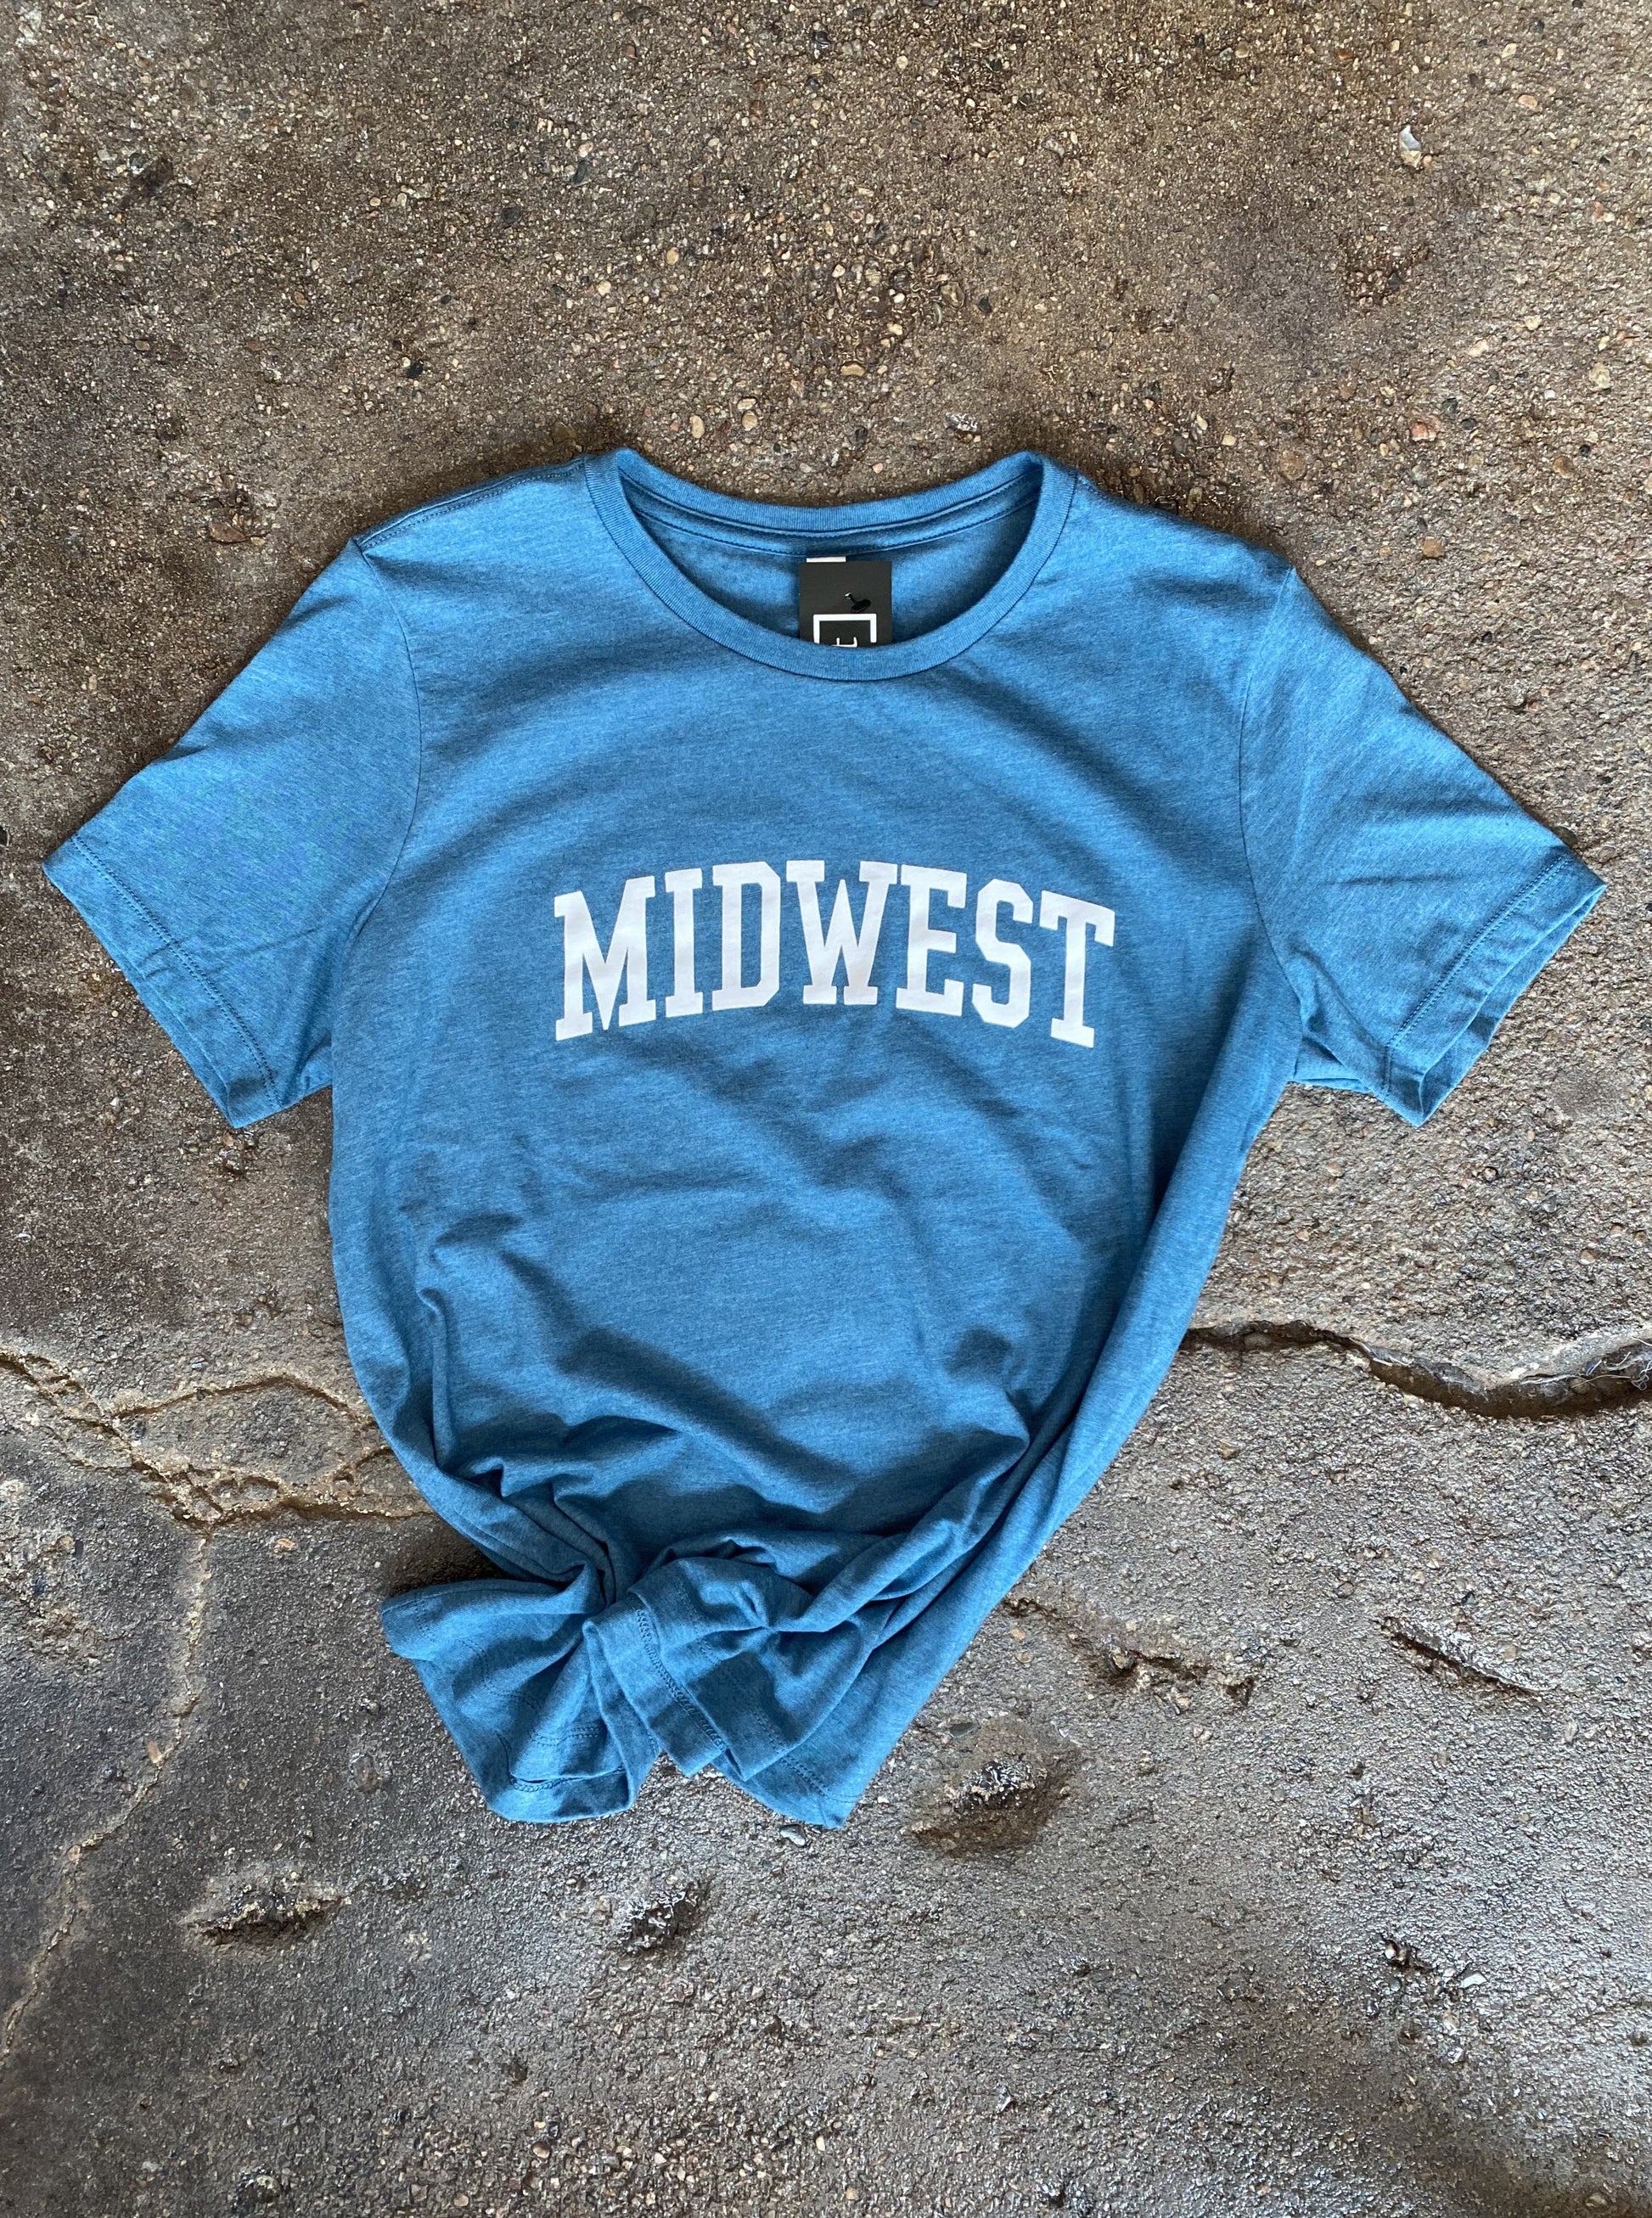 Midwest Clothing Co.